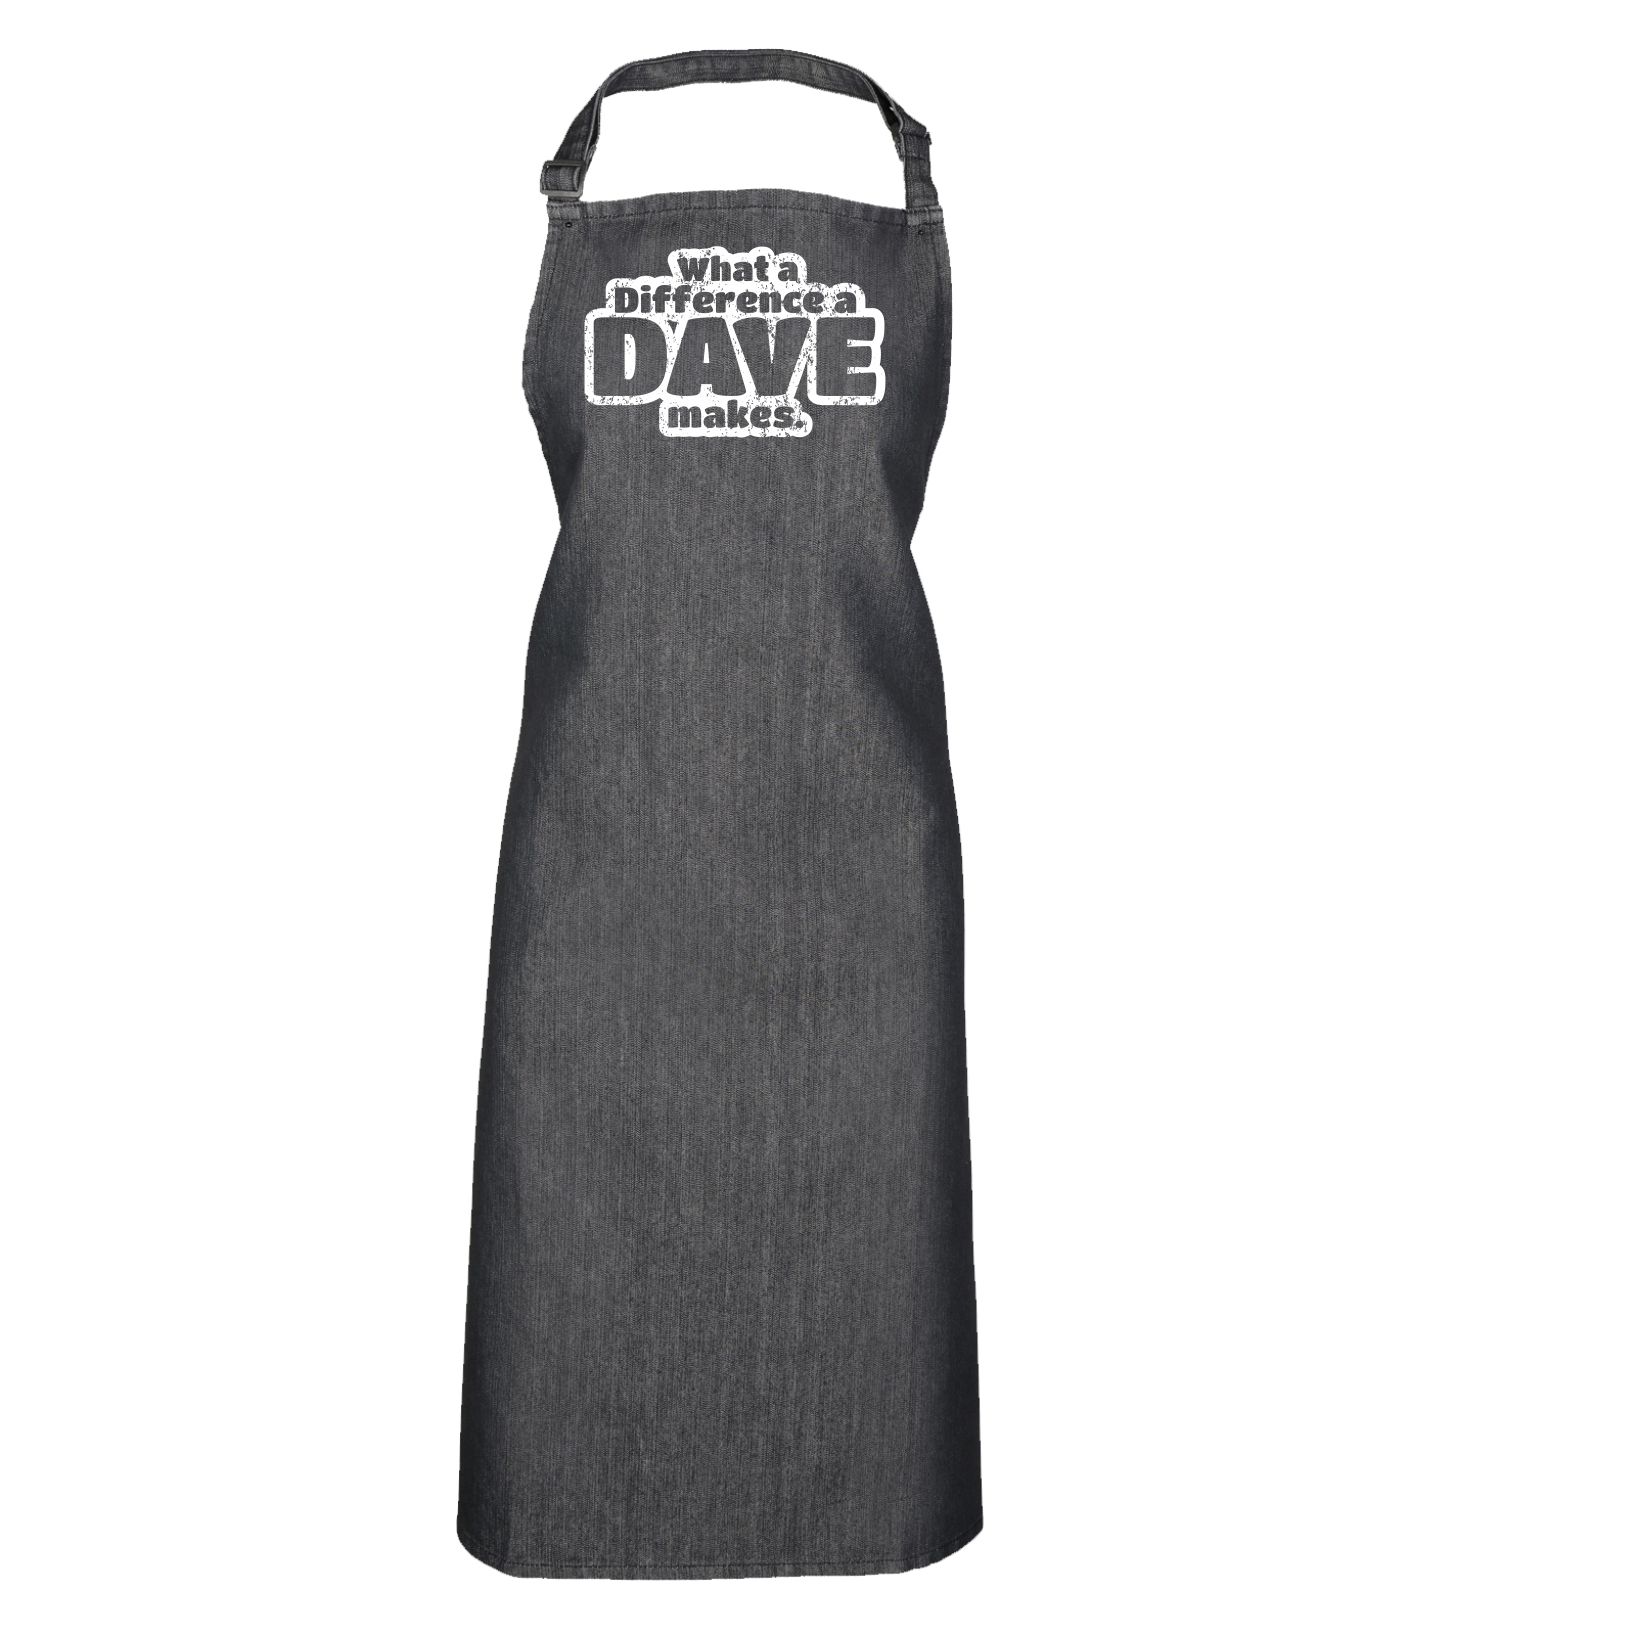 What A Difference A Dave Makes Funny Novelty Apron Kitchen Cooking 